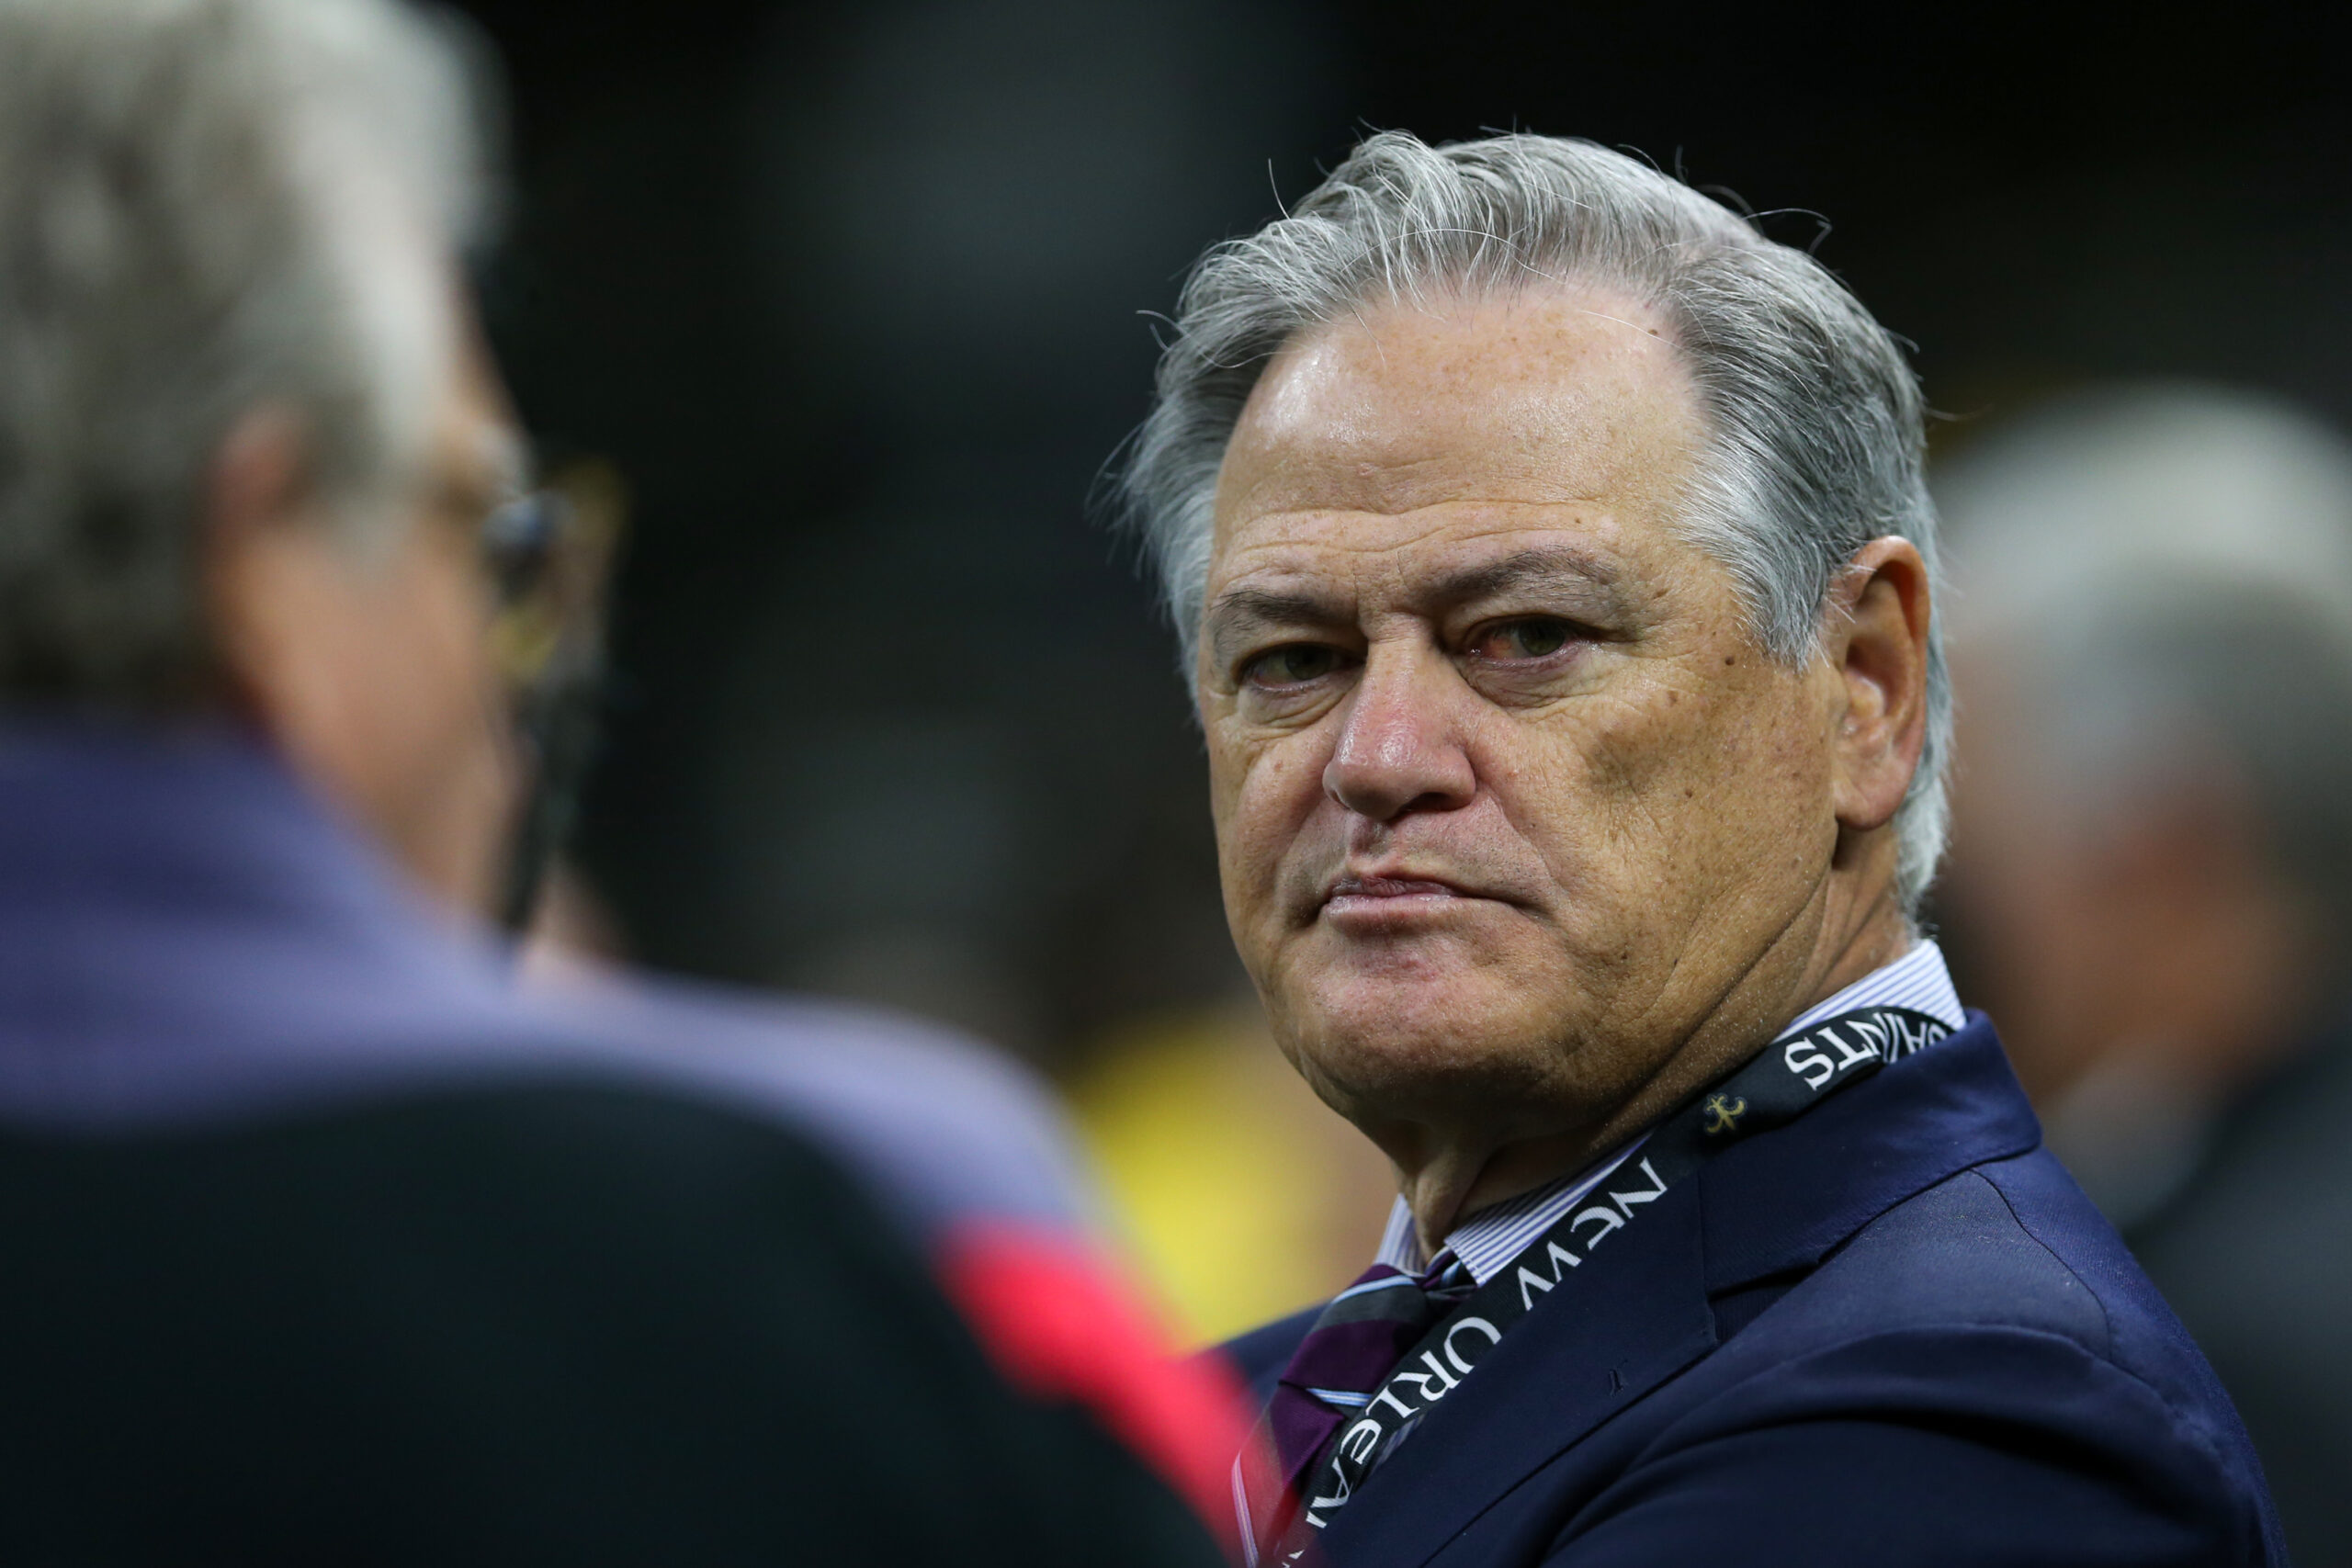 NFL general manager power rankings put Saints’ Mickey Loomis at No. 14